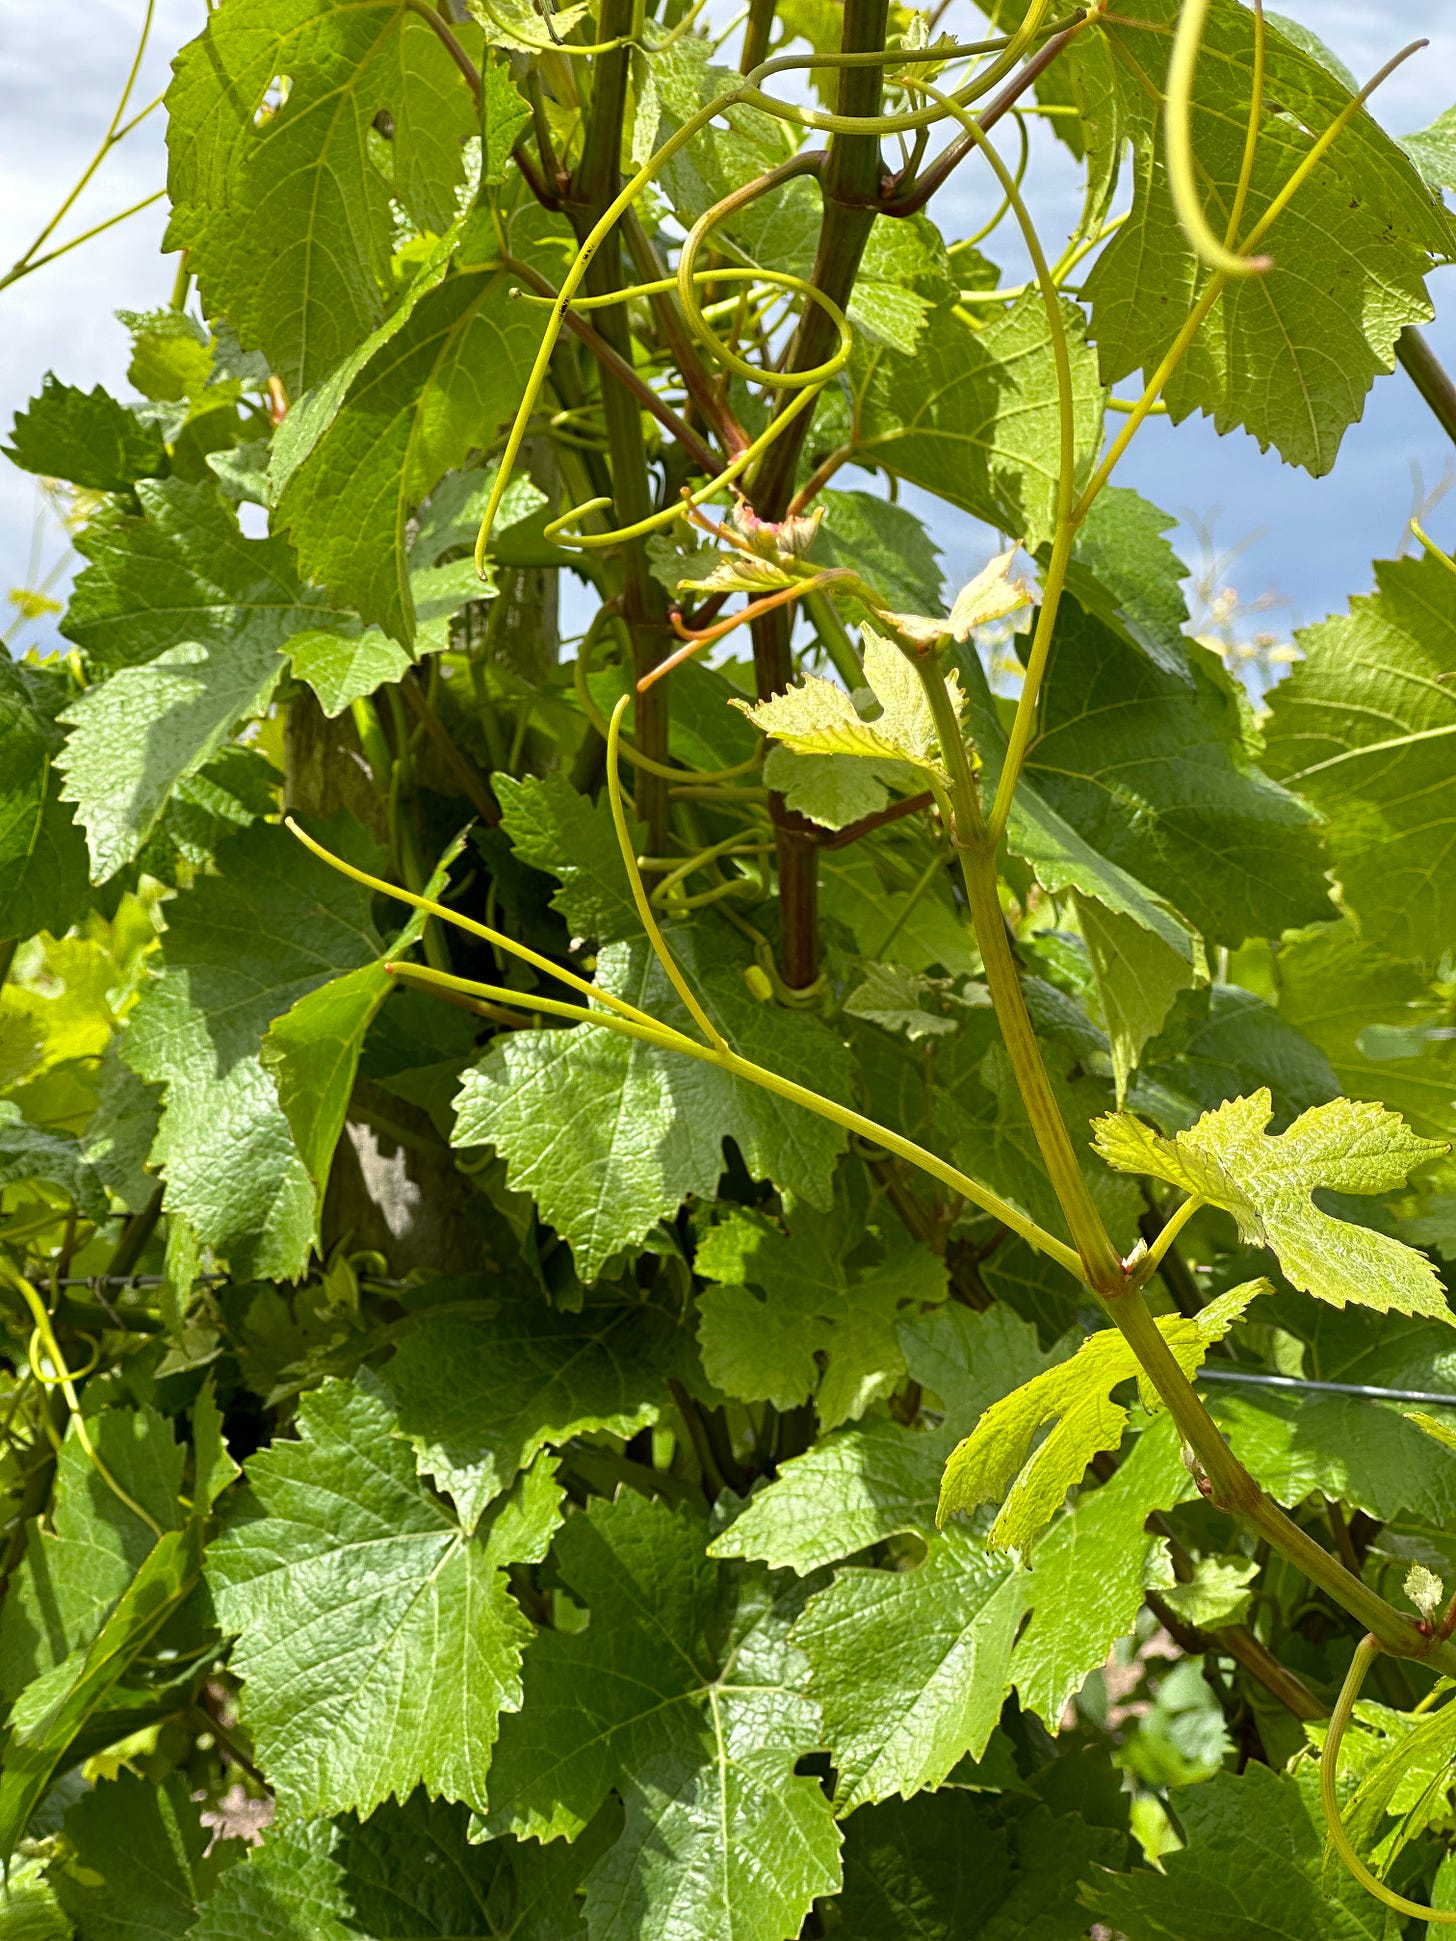 vines without grapes in vineyard